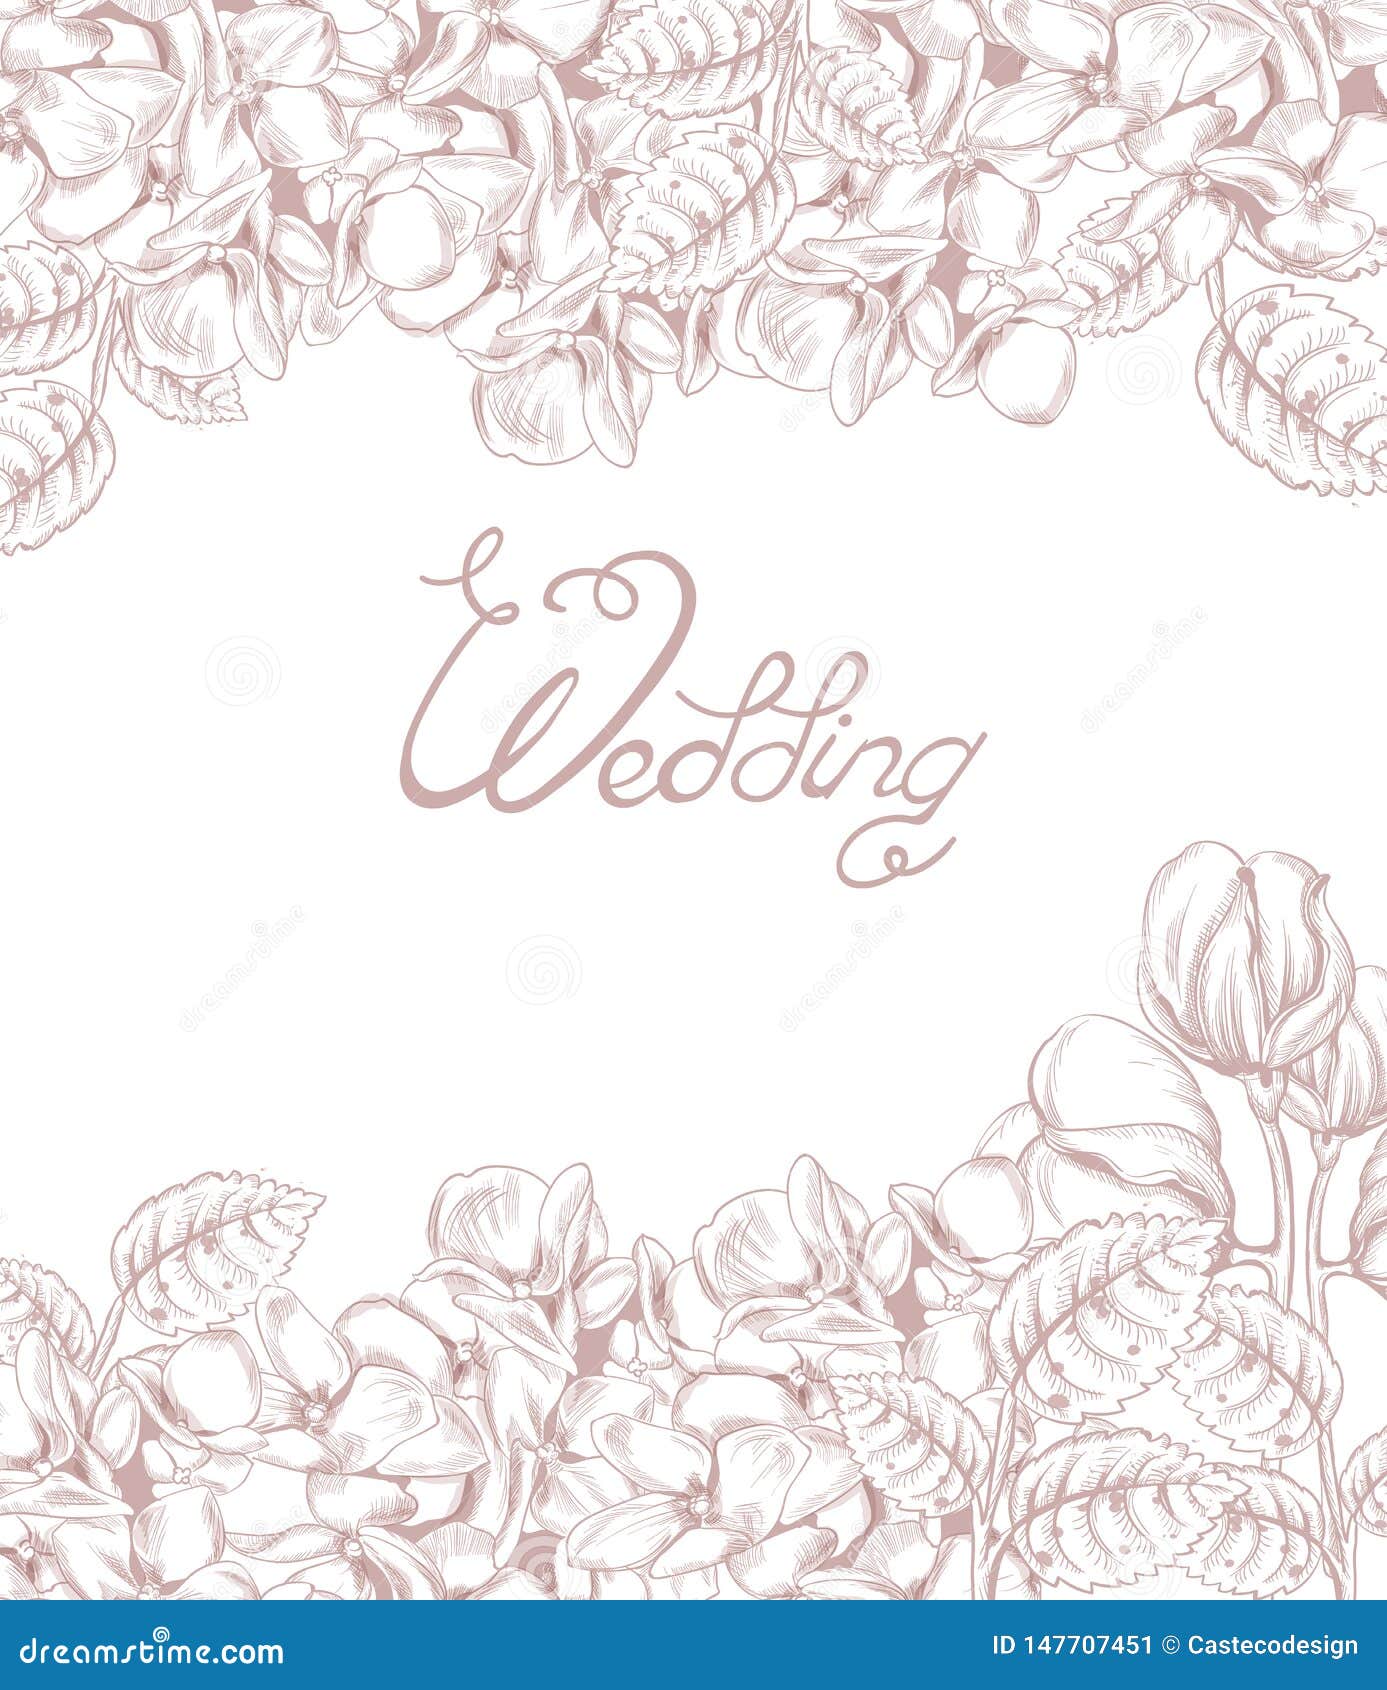 Download Vintage Wedding Card With Flowers Vector Lineart ...